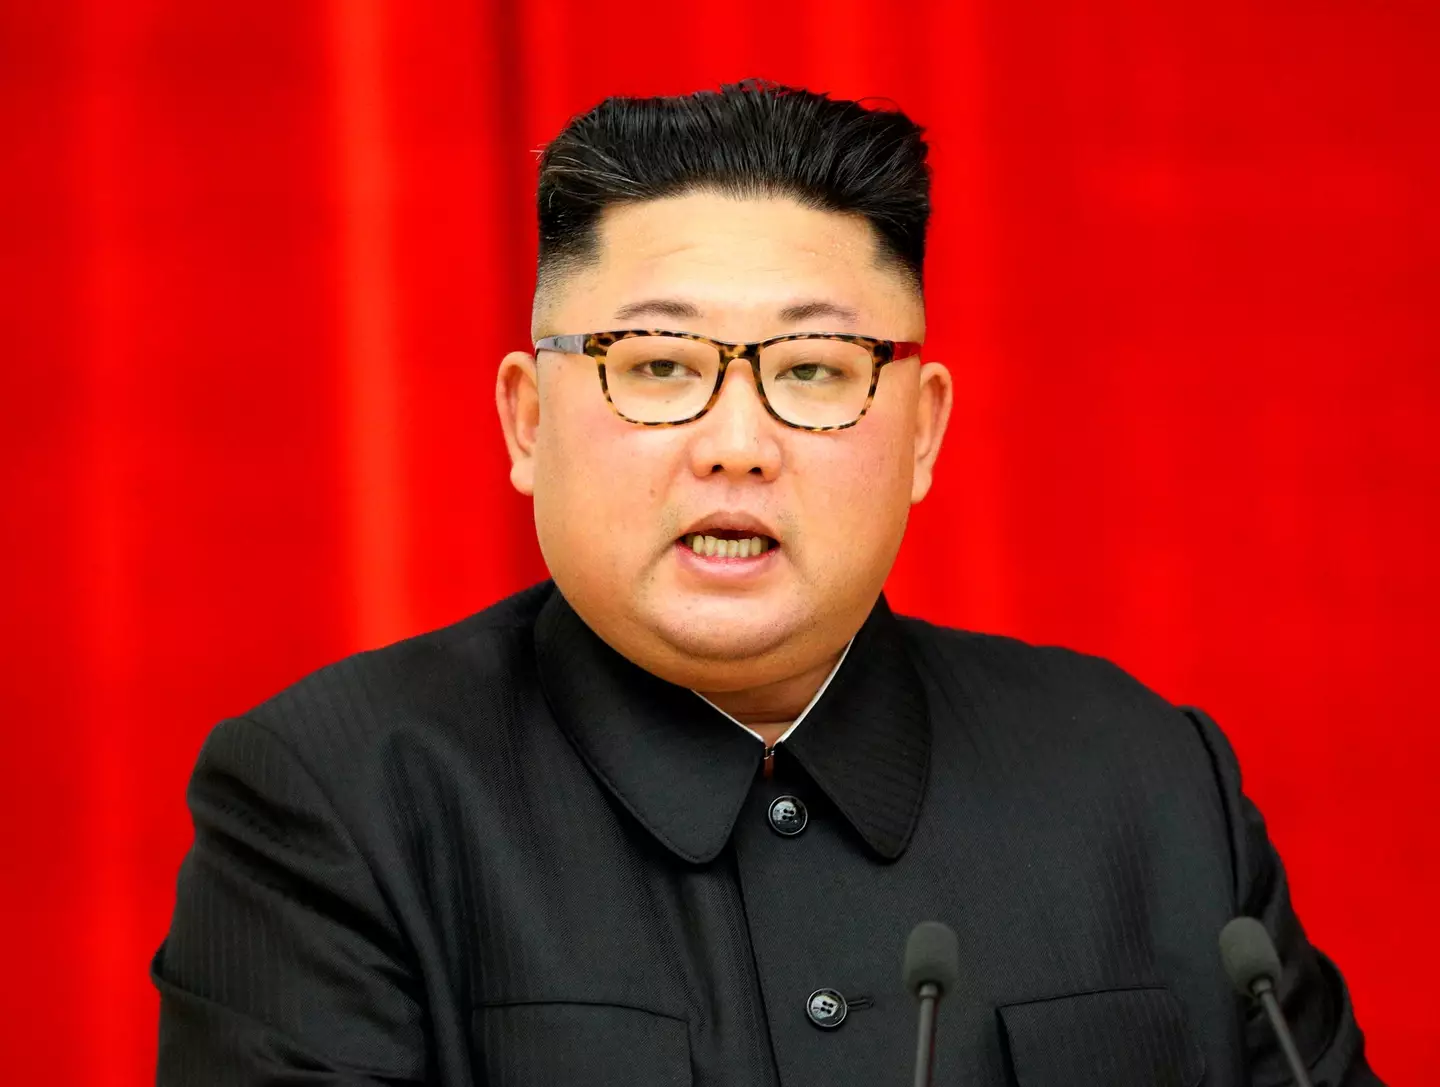 Dictator Kim Jong-un is cracking down on foreign media.